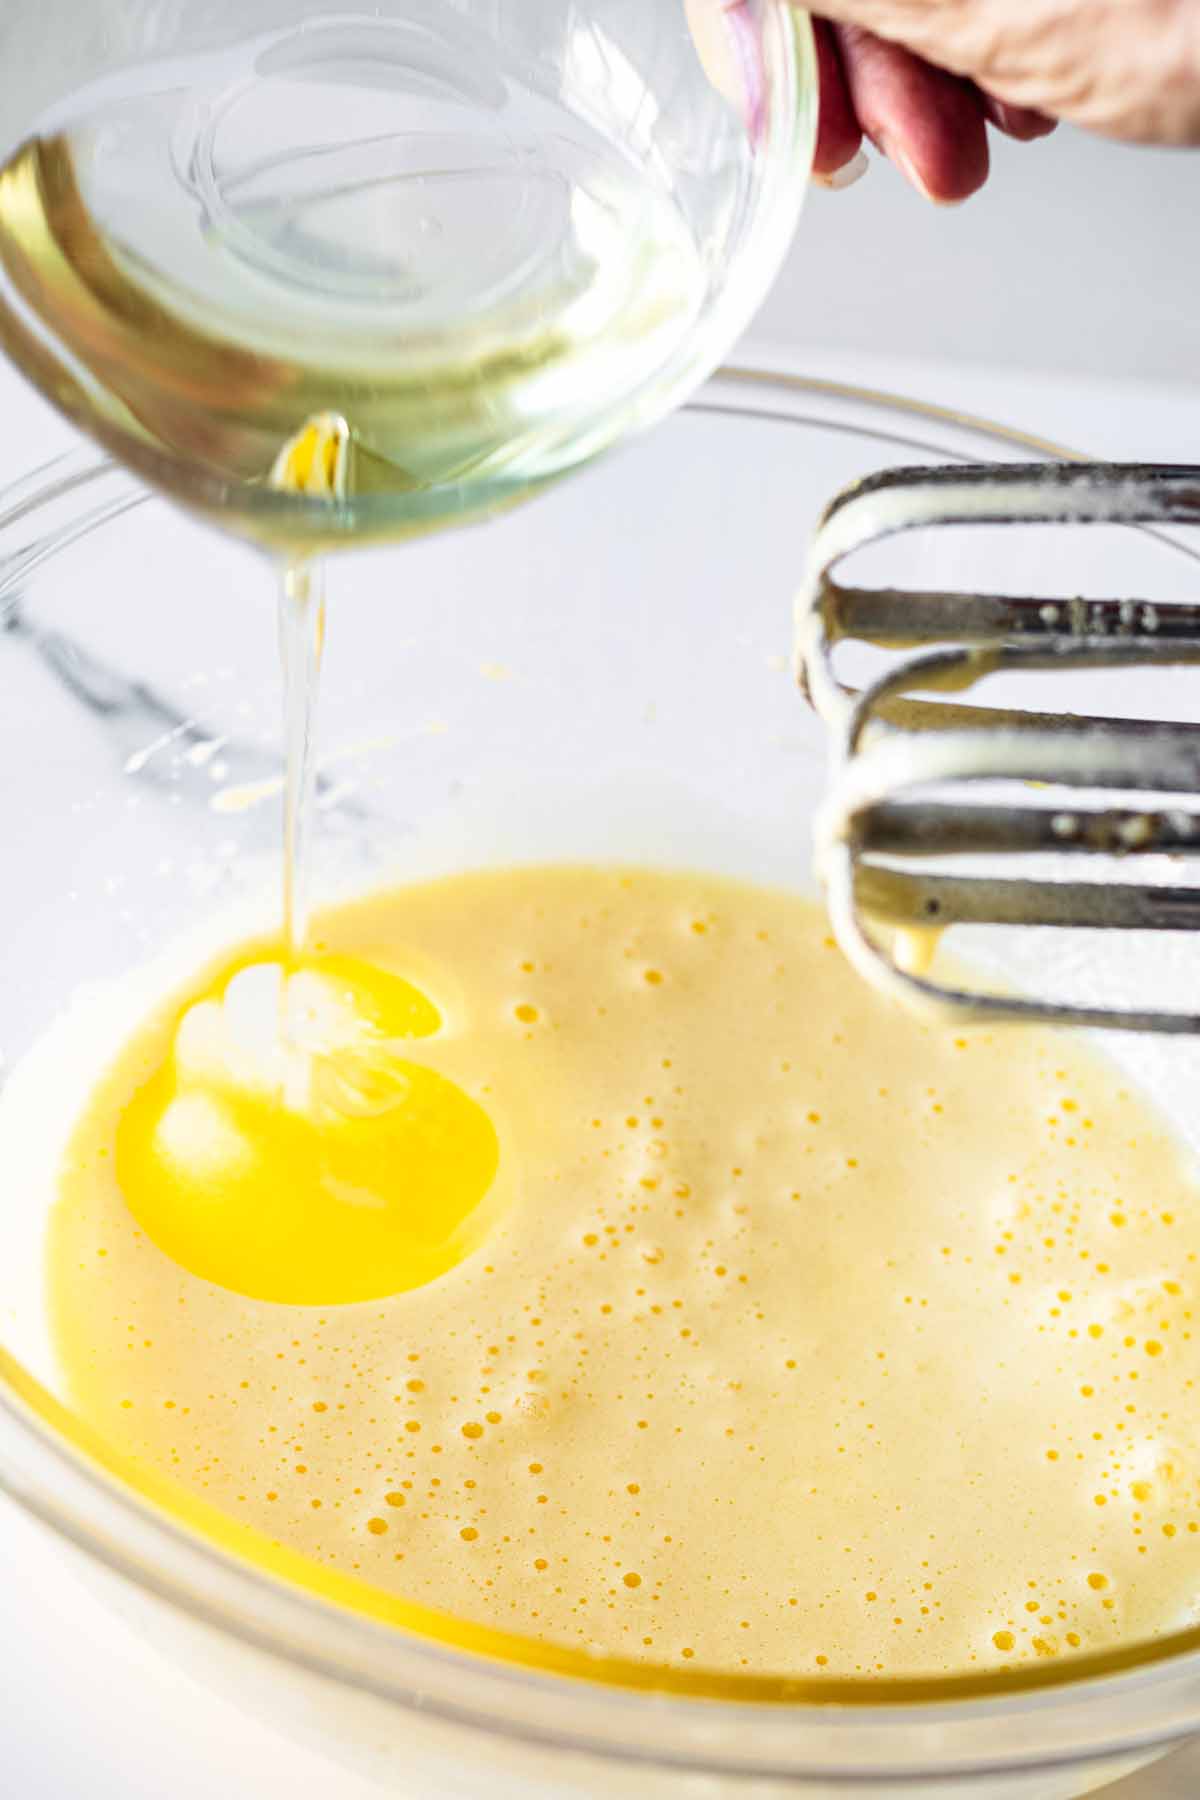 Oil being added to egg mixture in a glass bowl